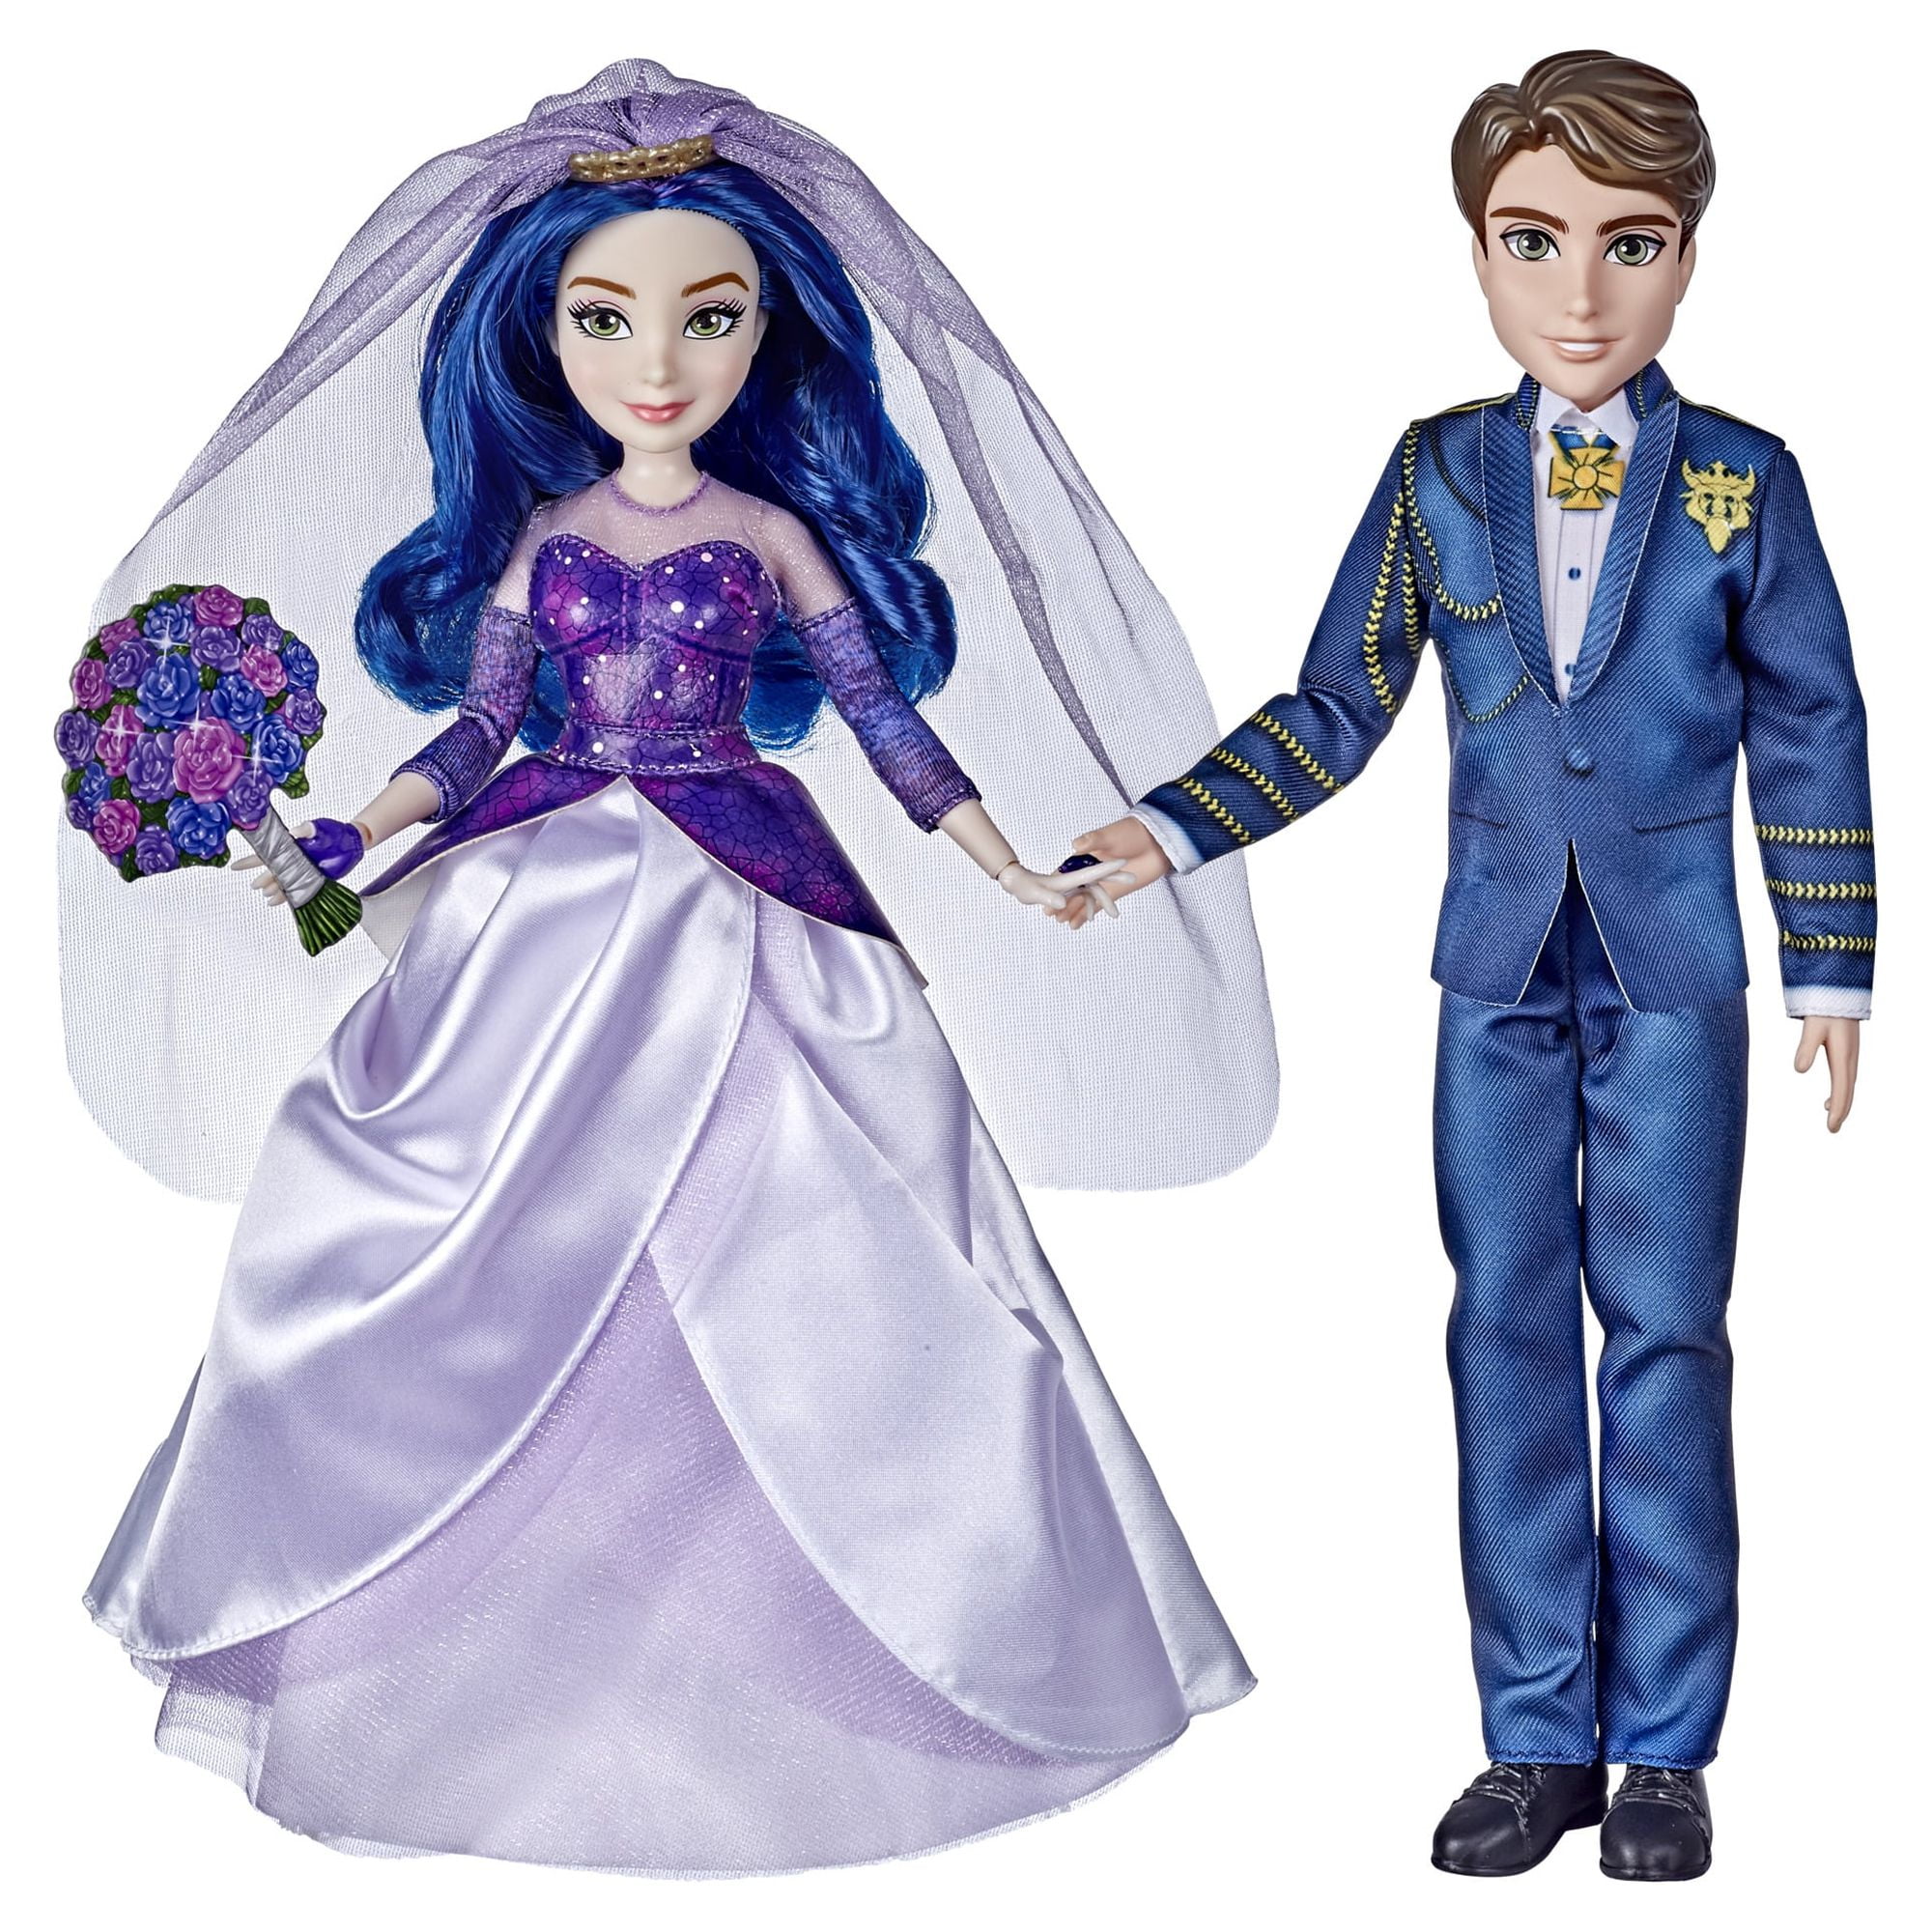 The Ultimate Guide to Buying Baby Dolls for Every Age  Disney descendants,  Disney descendants dolls, Disney barbie dolls